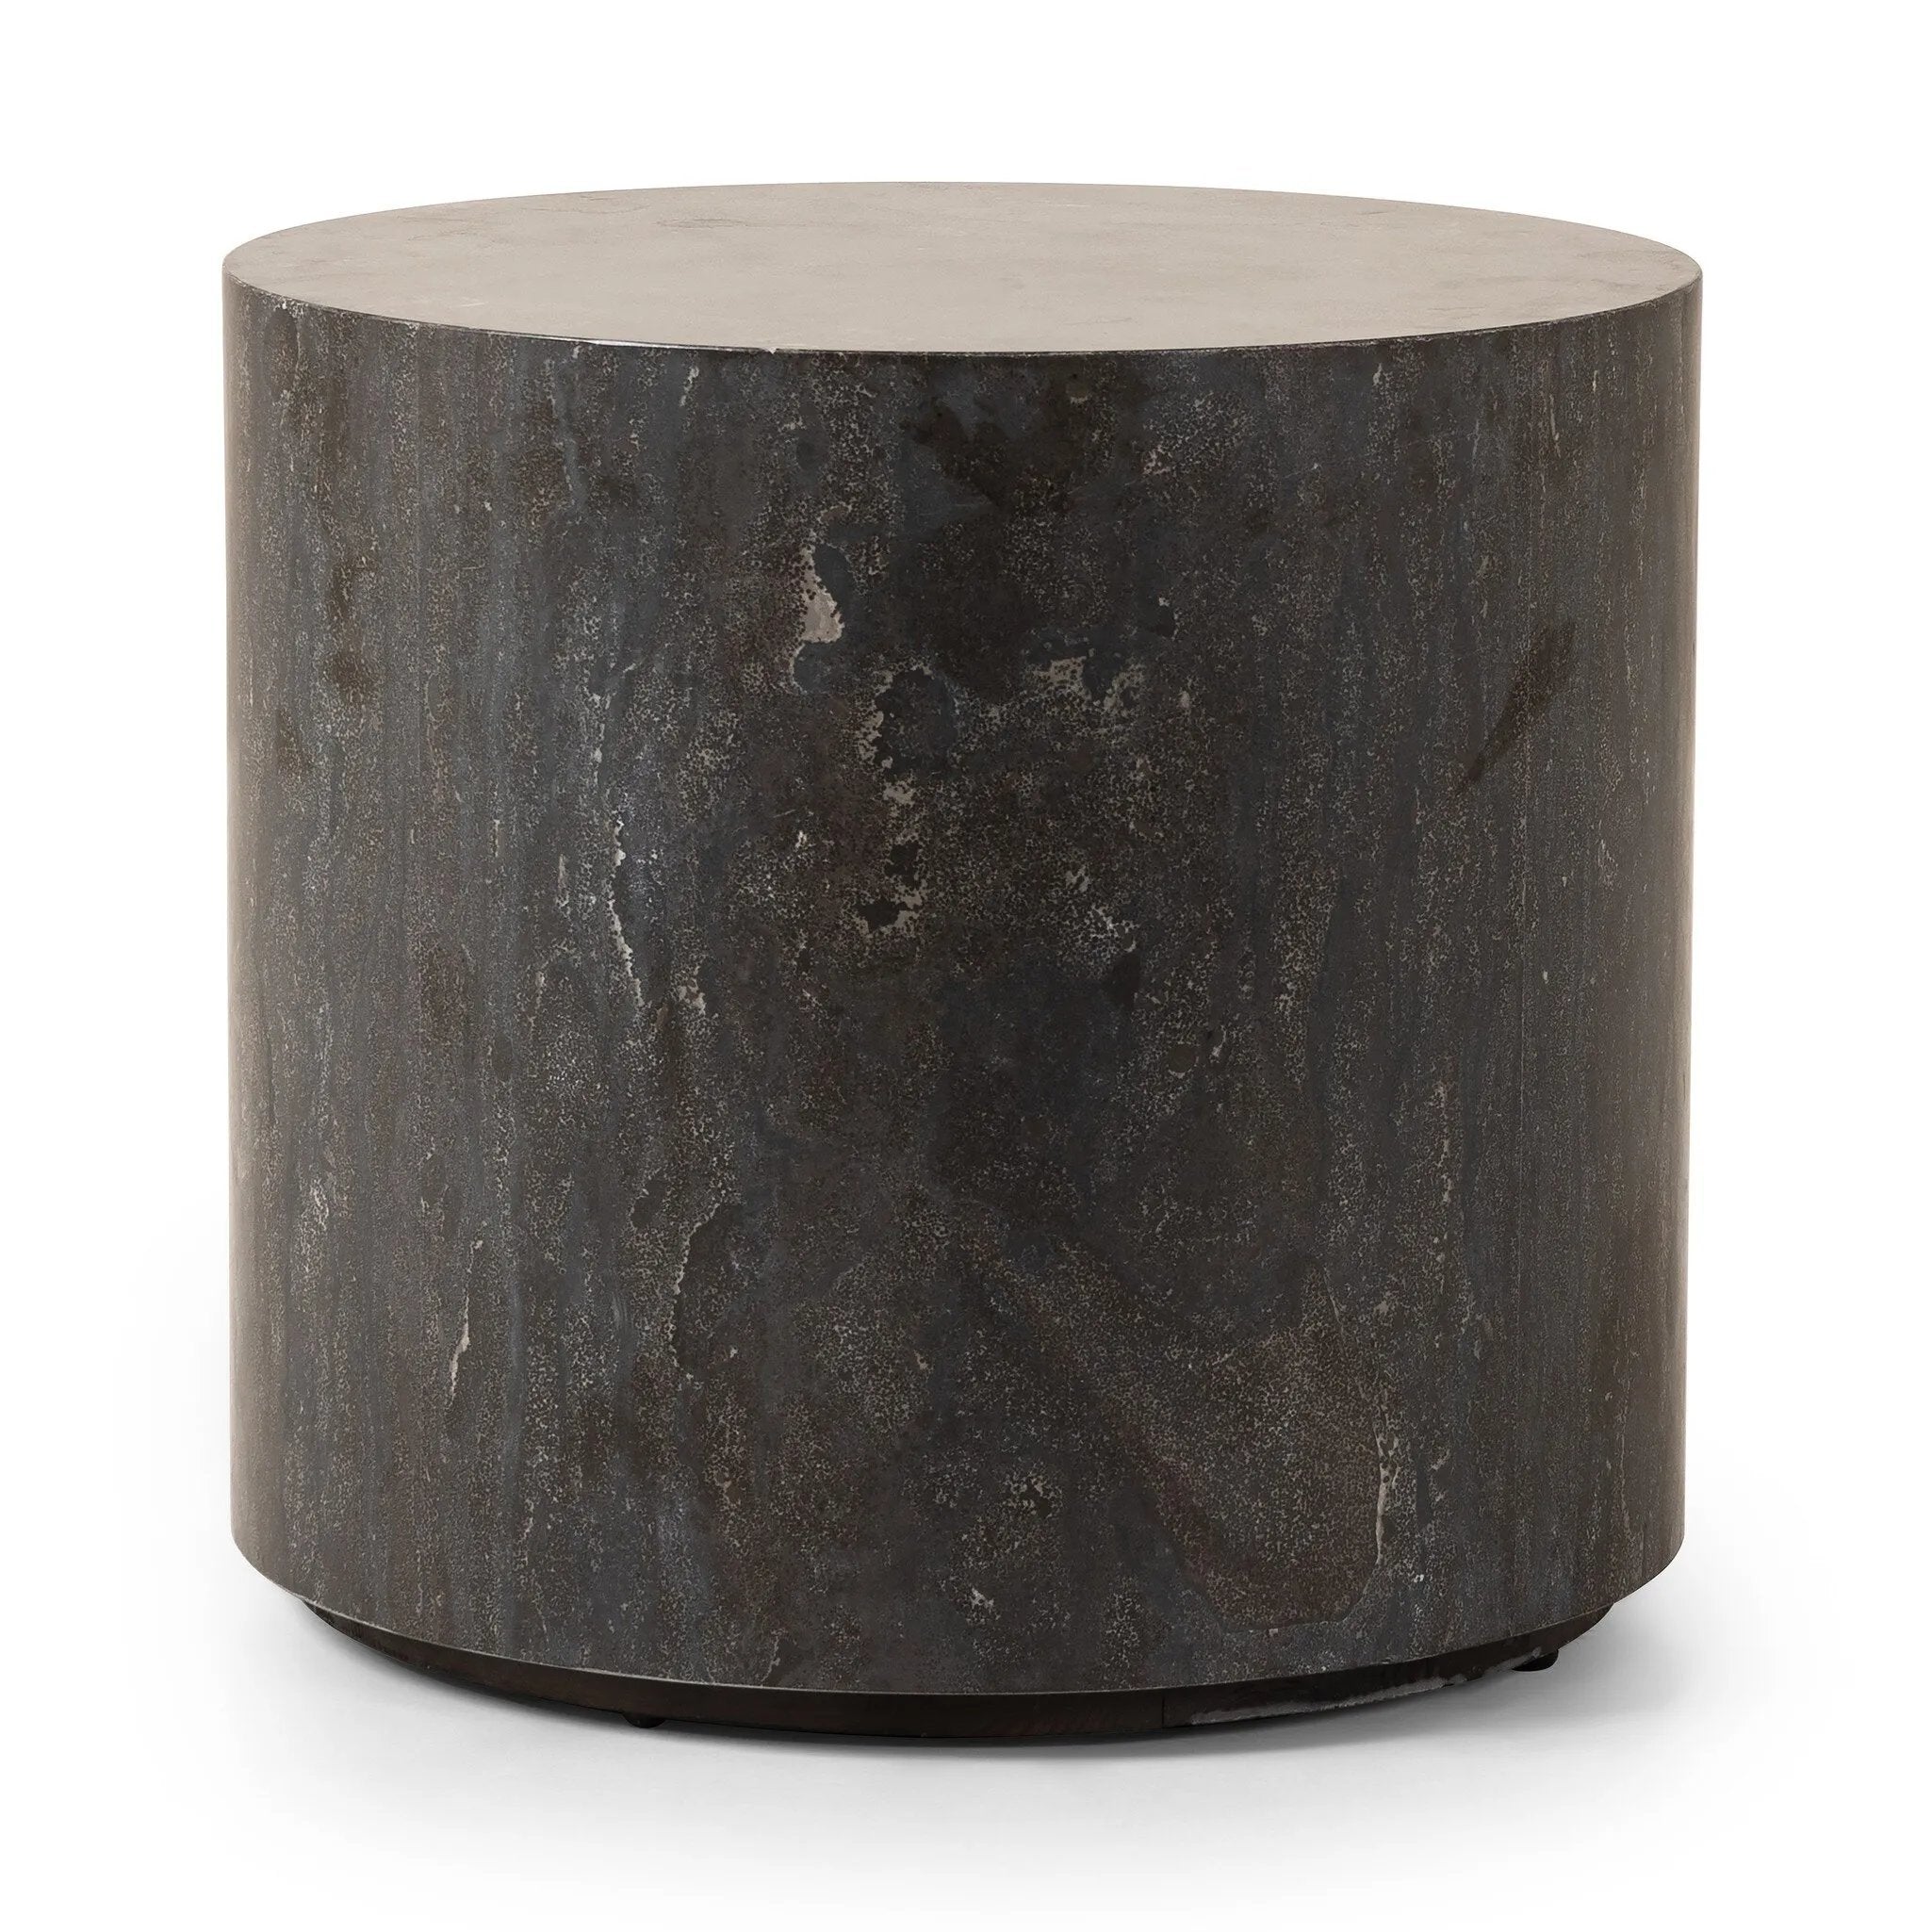 A cylinder-shaped end tables brings an organic look to the living room. Made from natural polished bluestone.Collection: Hughe Amethyst Home provides interior design, new home construction design consulting, vintage area rugs, and lighting in the Houston metro area.